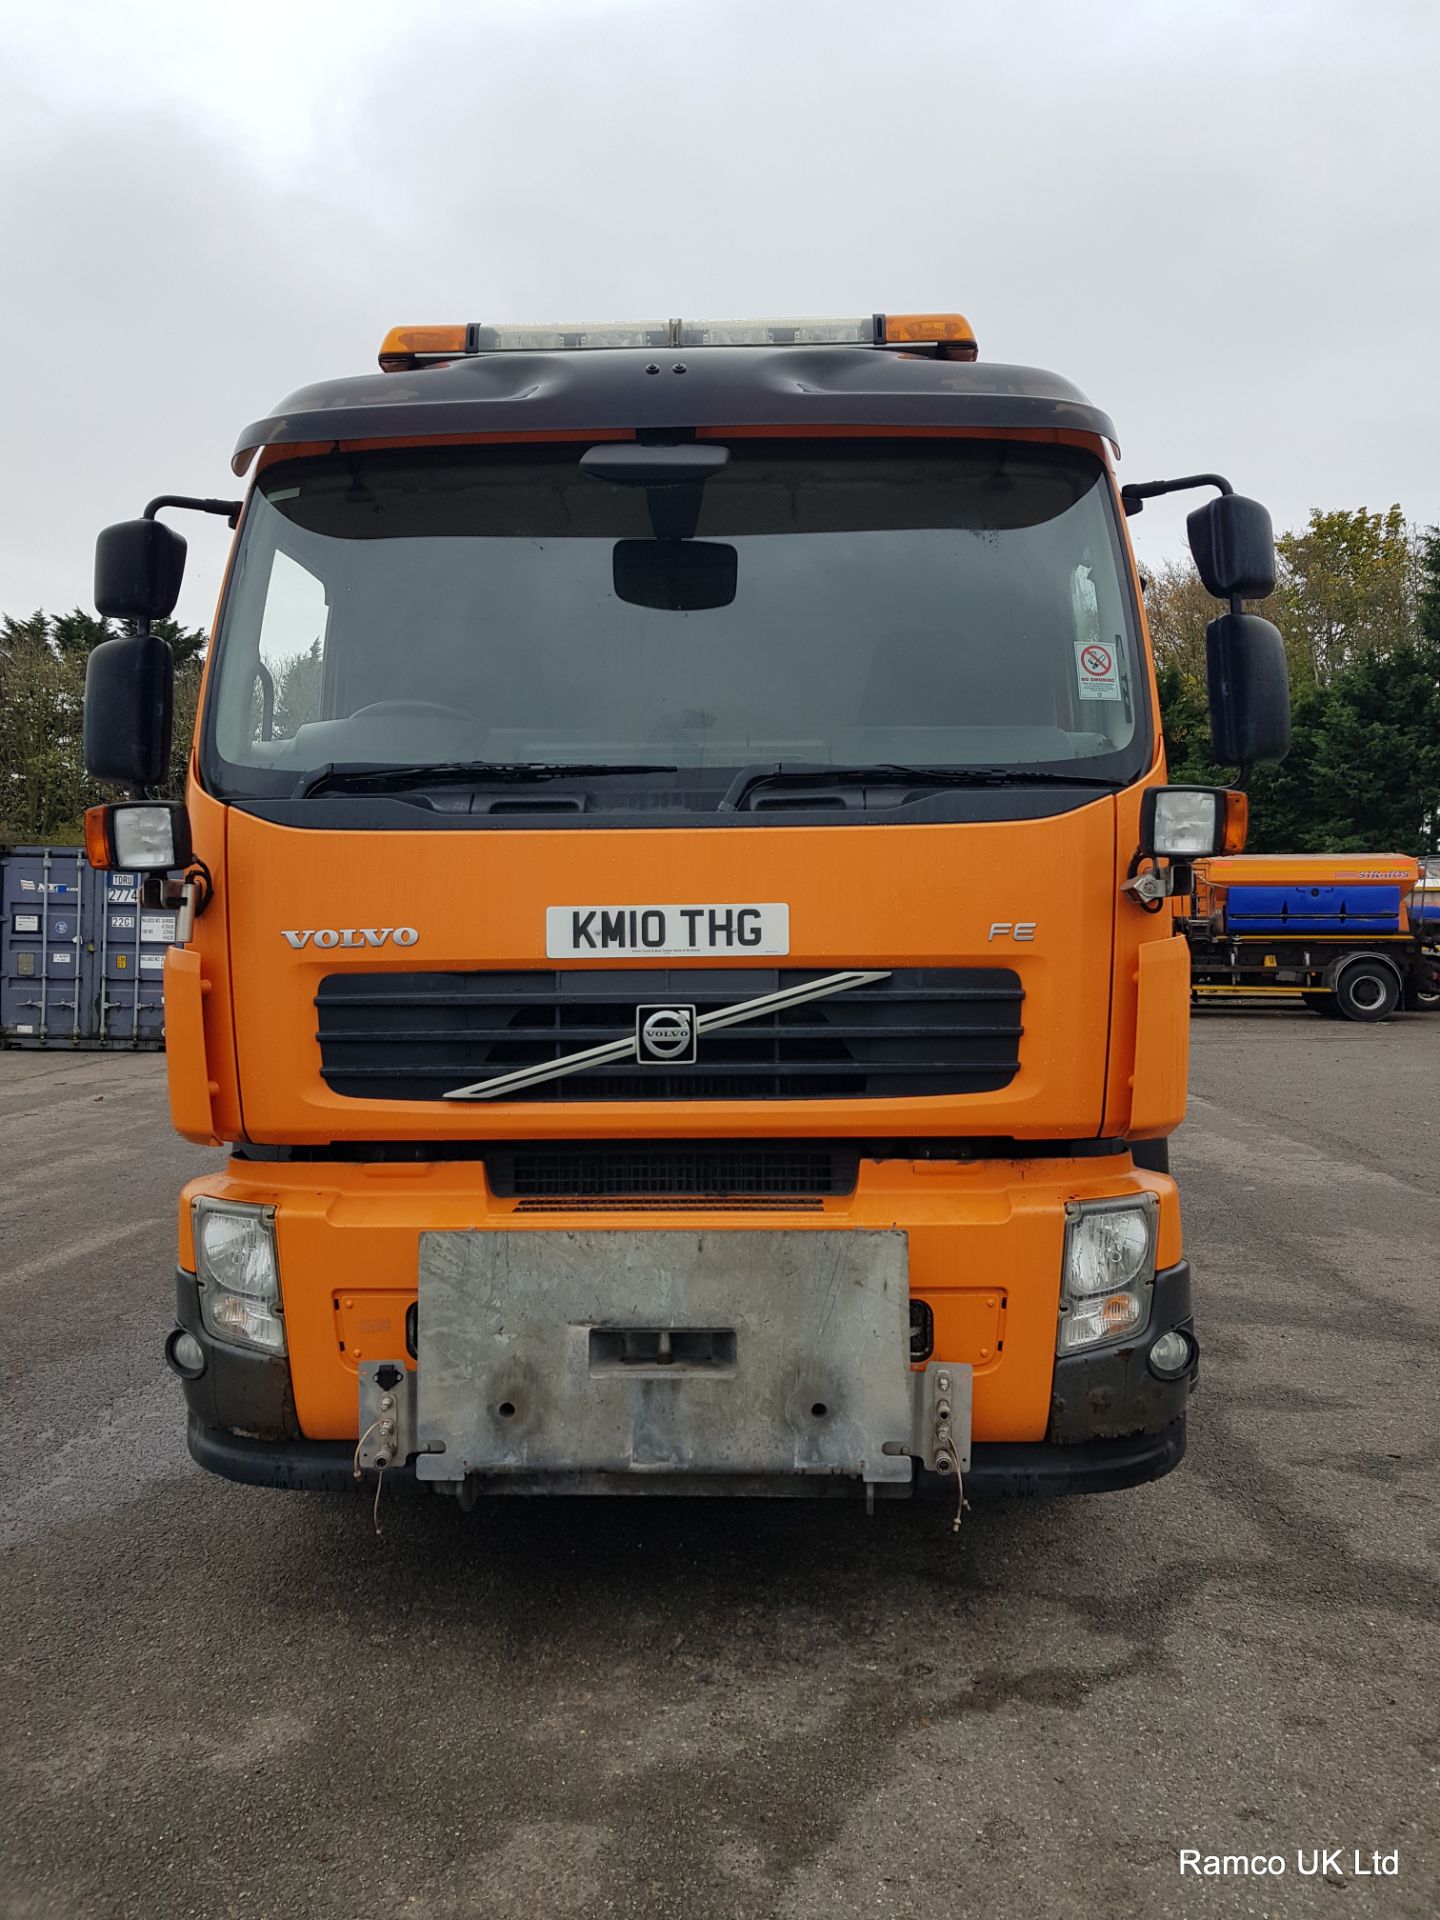 2010 (reg KM10 THG) Volvo FE 340 with Romaquip pre-wet gritter mount. - Image 2 of 17